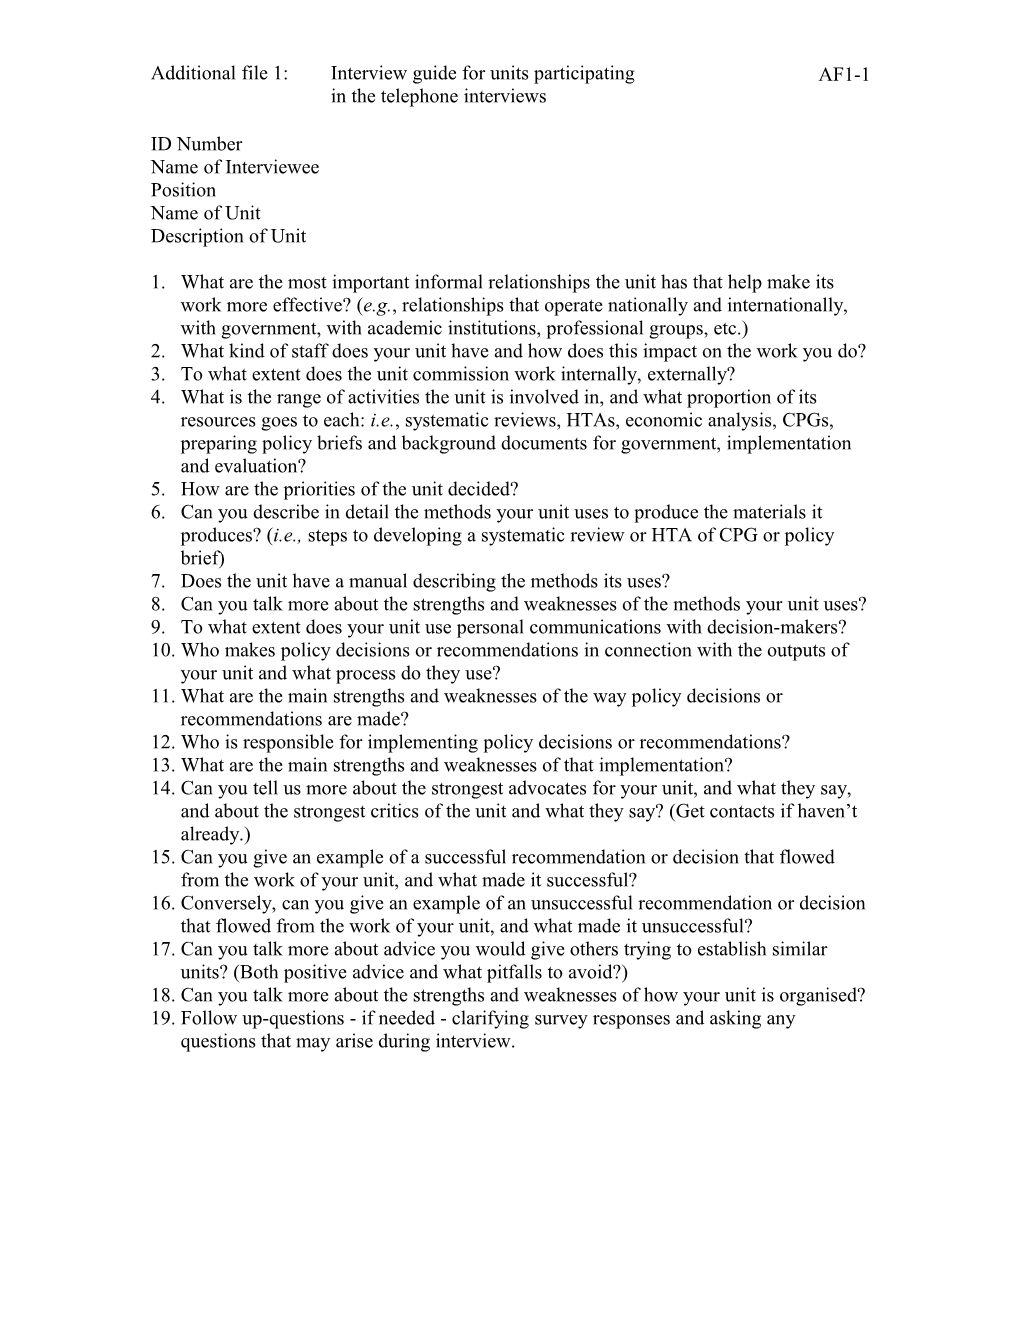 Appendix 2: Questionnaire for Units Producing Clinical Practice Guidelines Or Health Technology